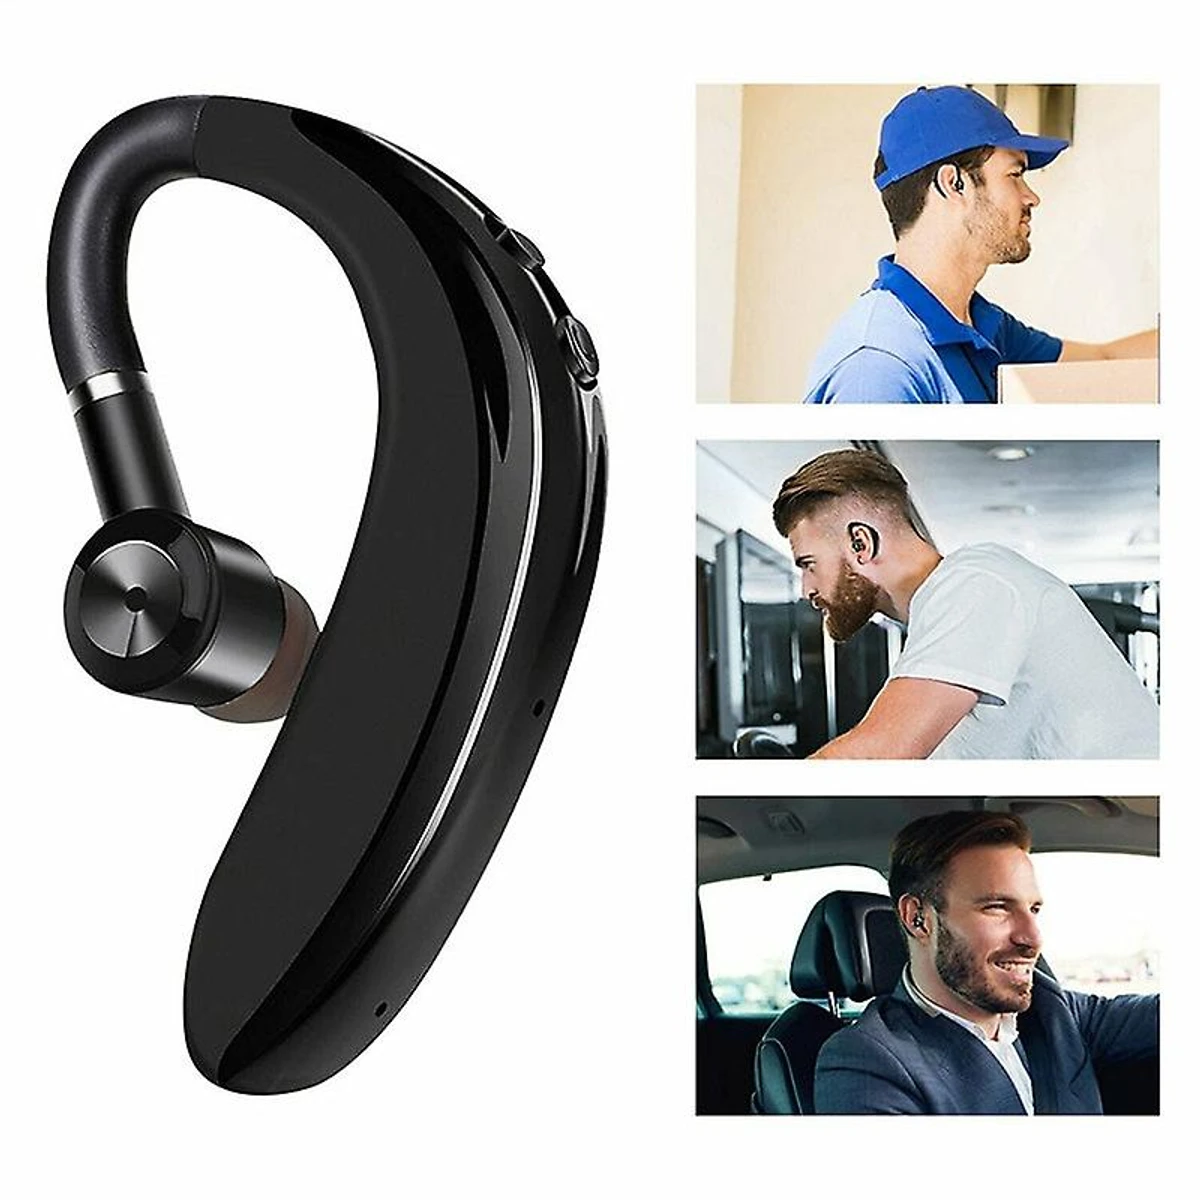 Wireless earphones Handsfree Business Headset S109 Drive Call Mini Earbud Bluetooth with MIC For Android IOS